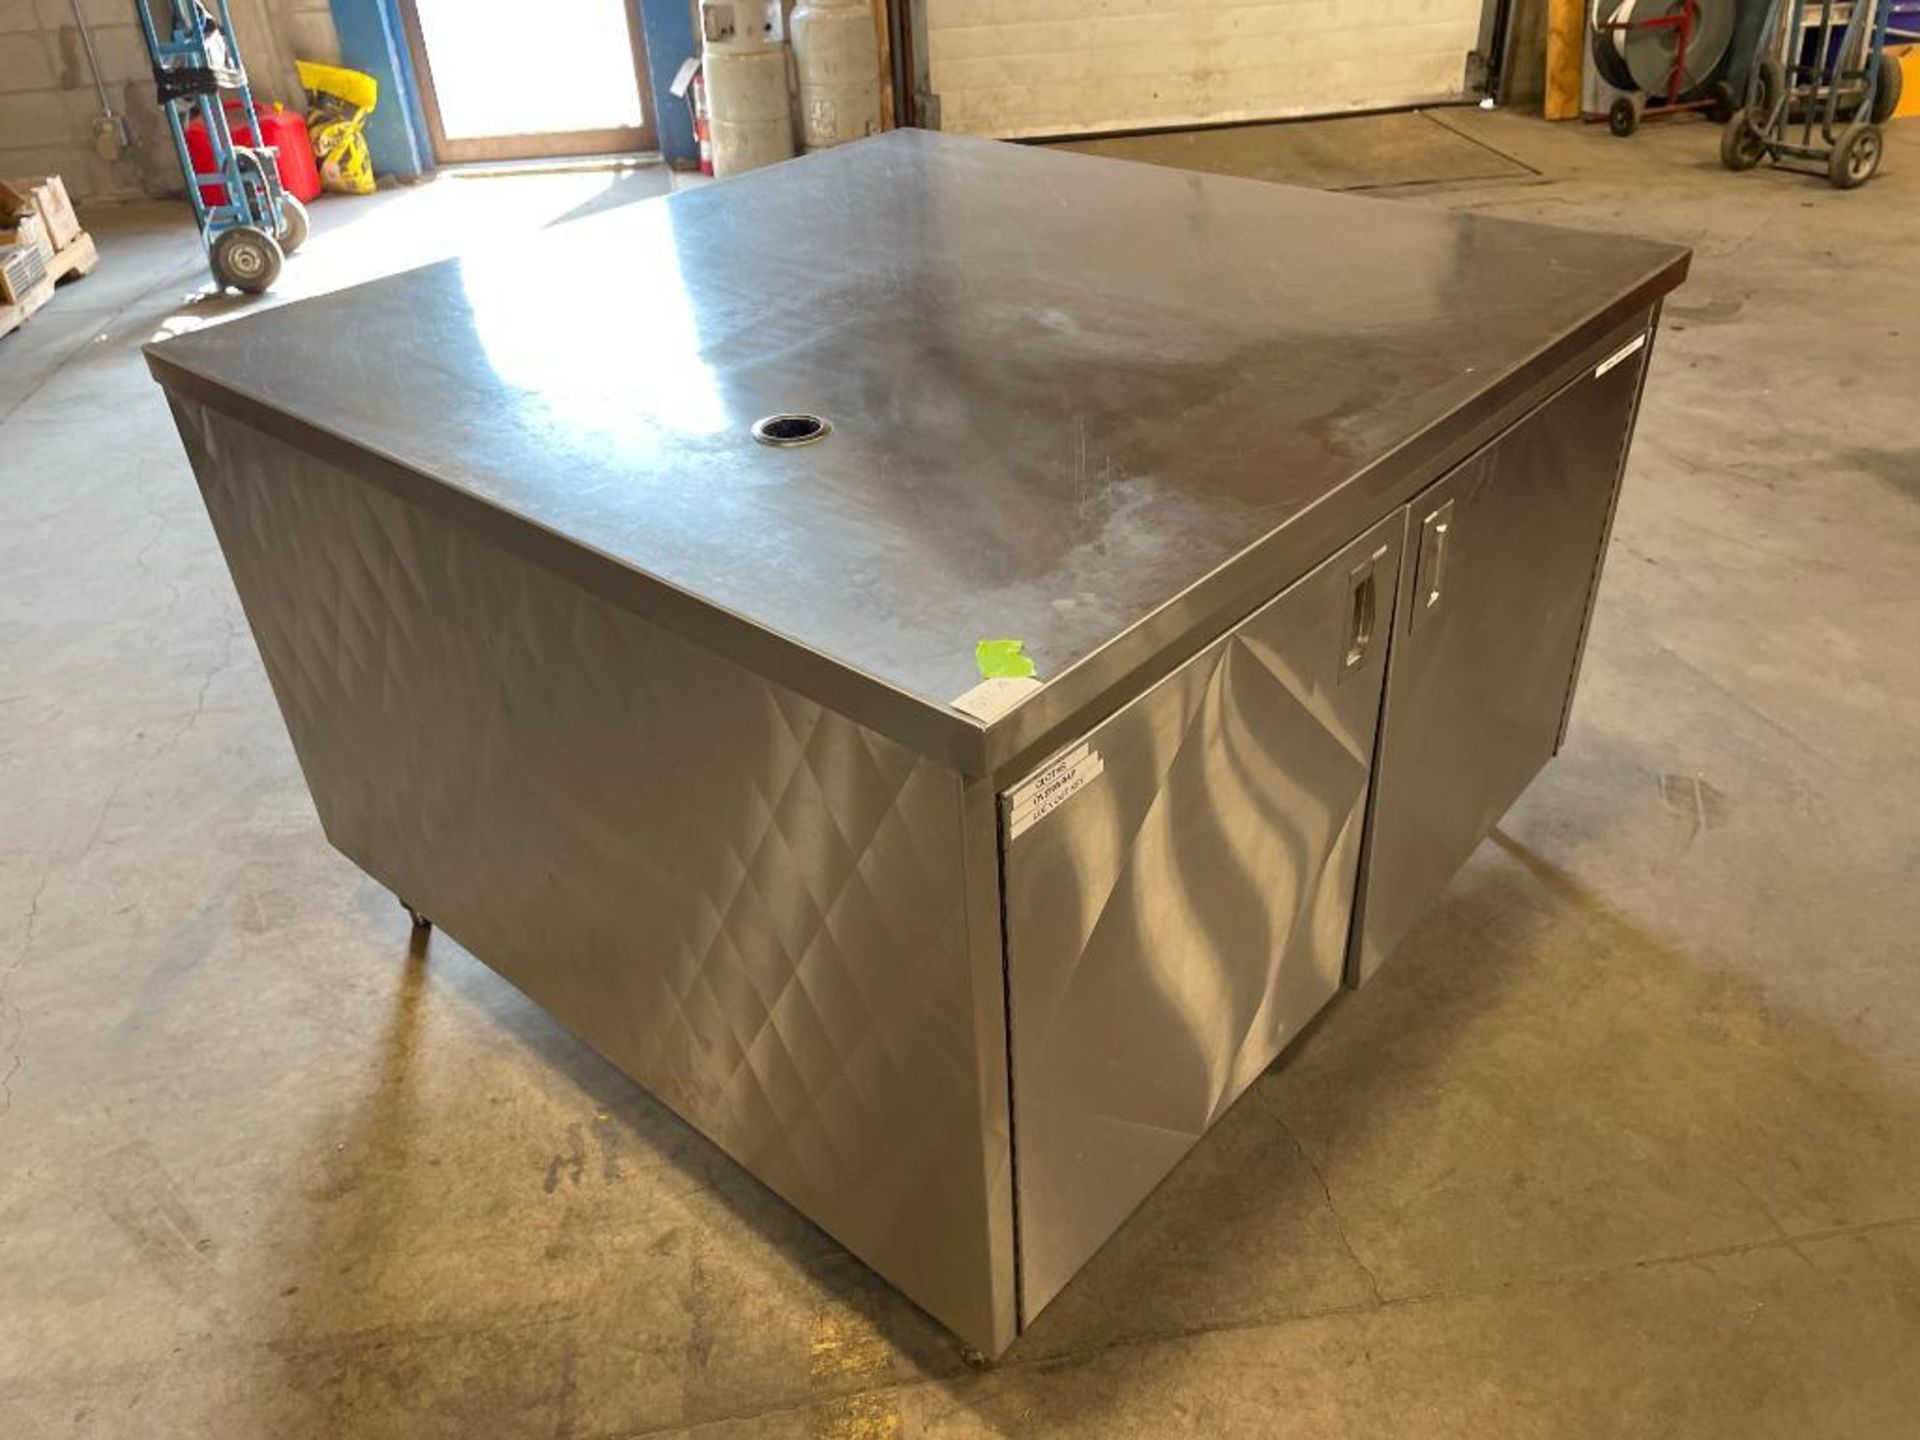 48" FOUR DOOR STAINLESS STEEL STORAGE CABINET/EQUIPMENT STAND - Image 24 of 24